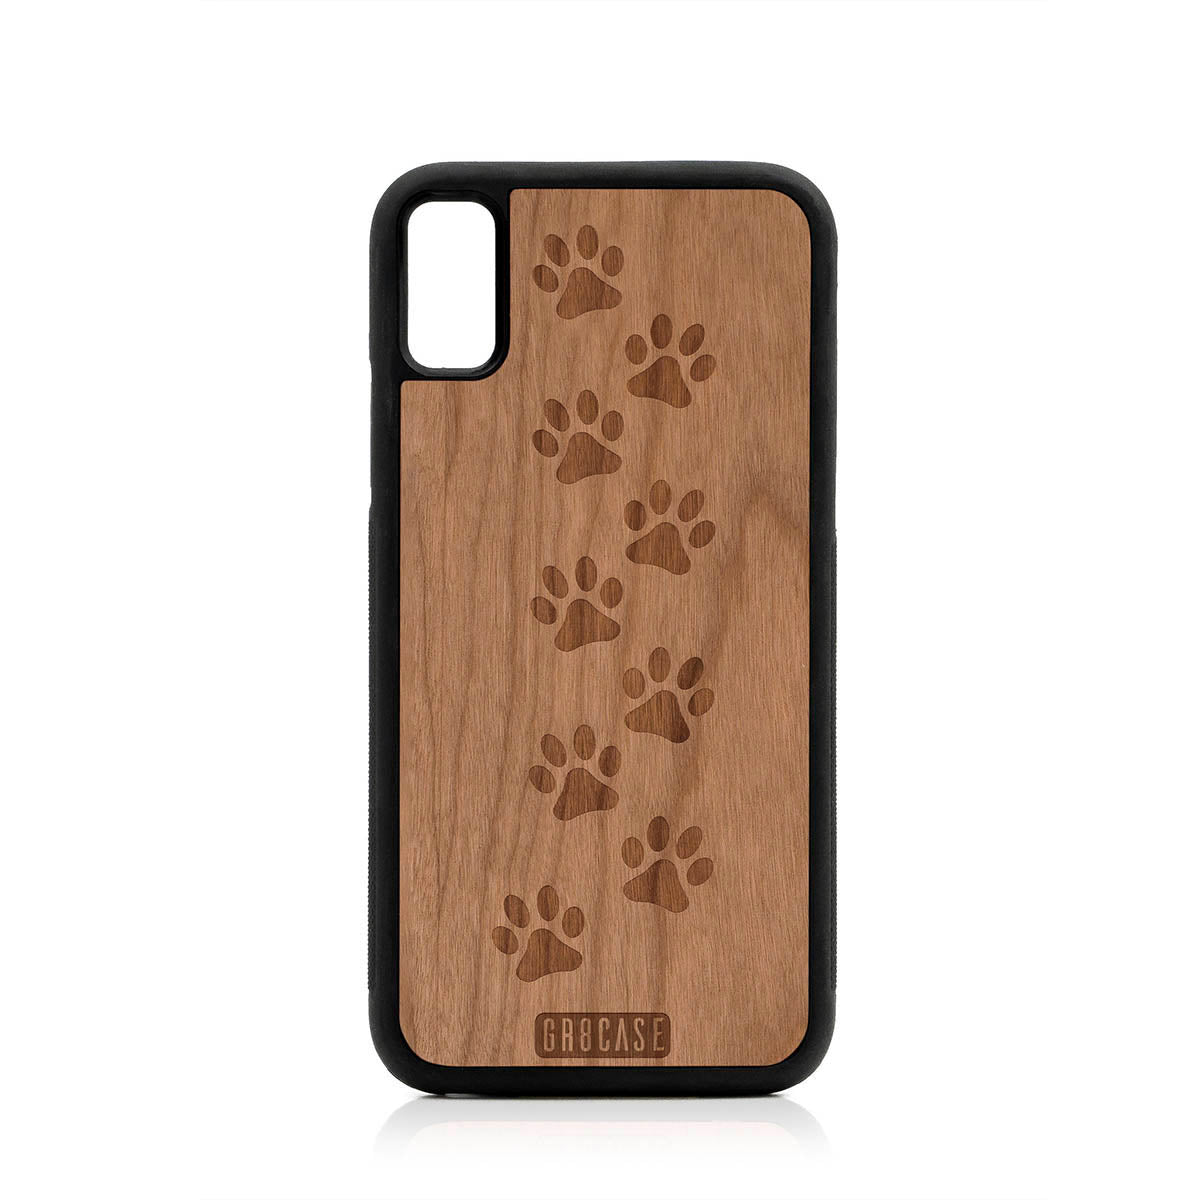 Paw Prints Design Wood Case For iPhone XR by GR8CASE